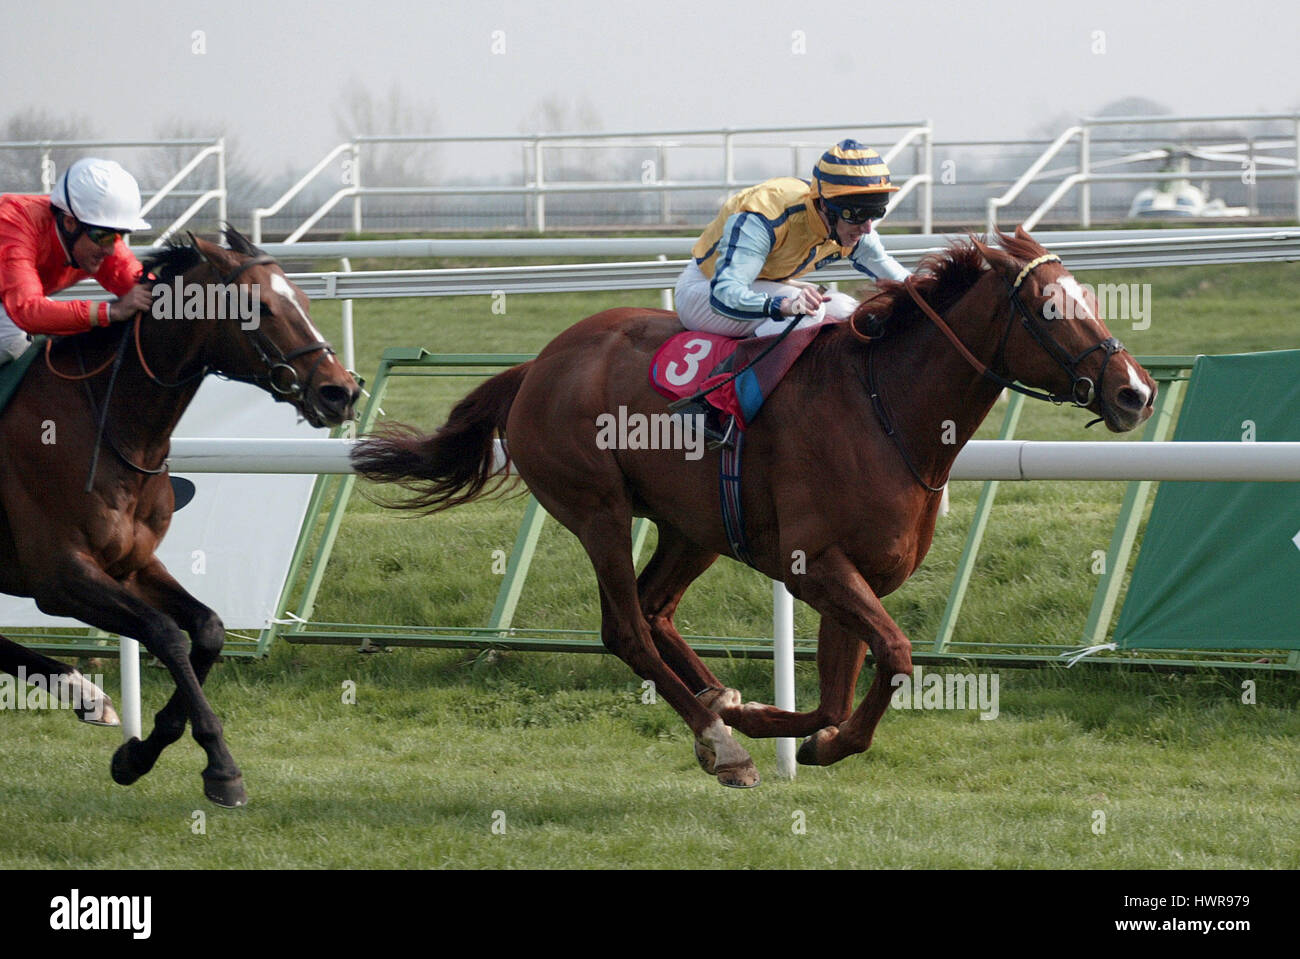 COUNSEL'S OPINION RIDDEN BY G.BAKER DONCASTER RACECOURSE DONCASTER 01 April 2005 Stock Photo